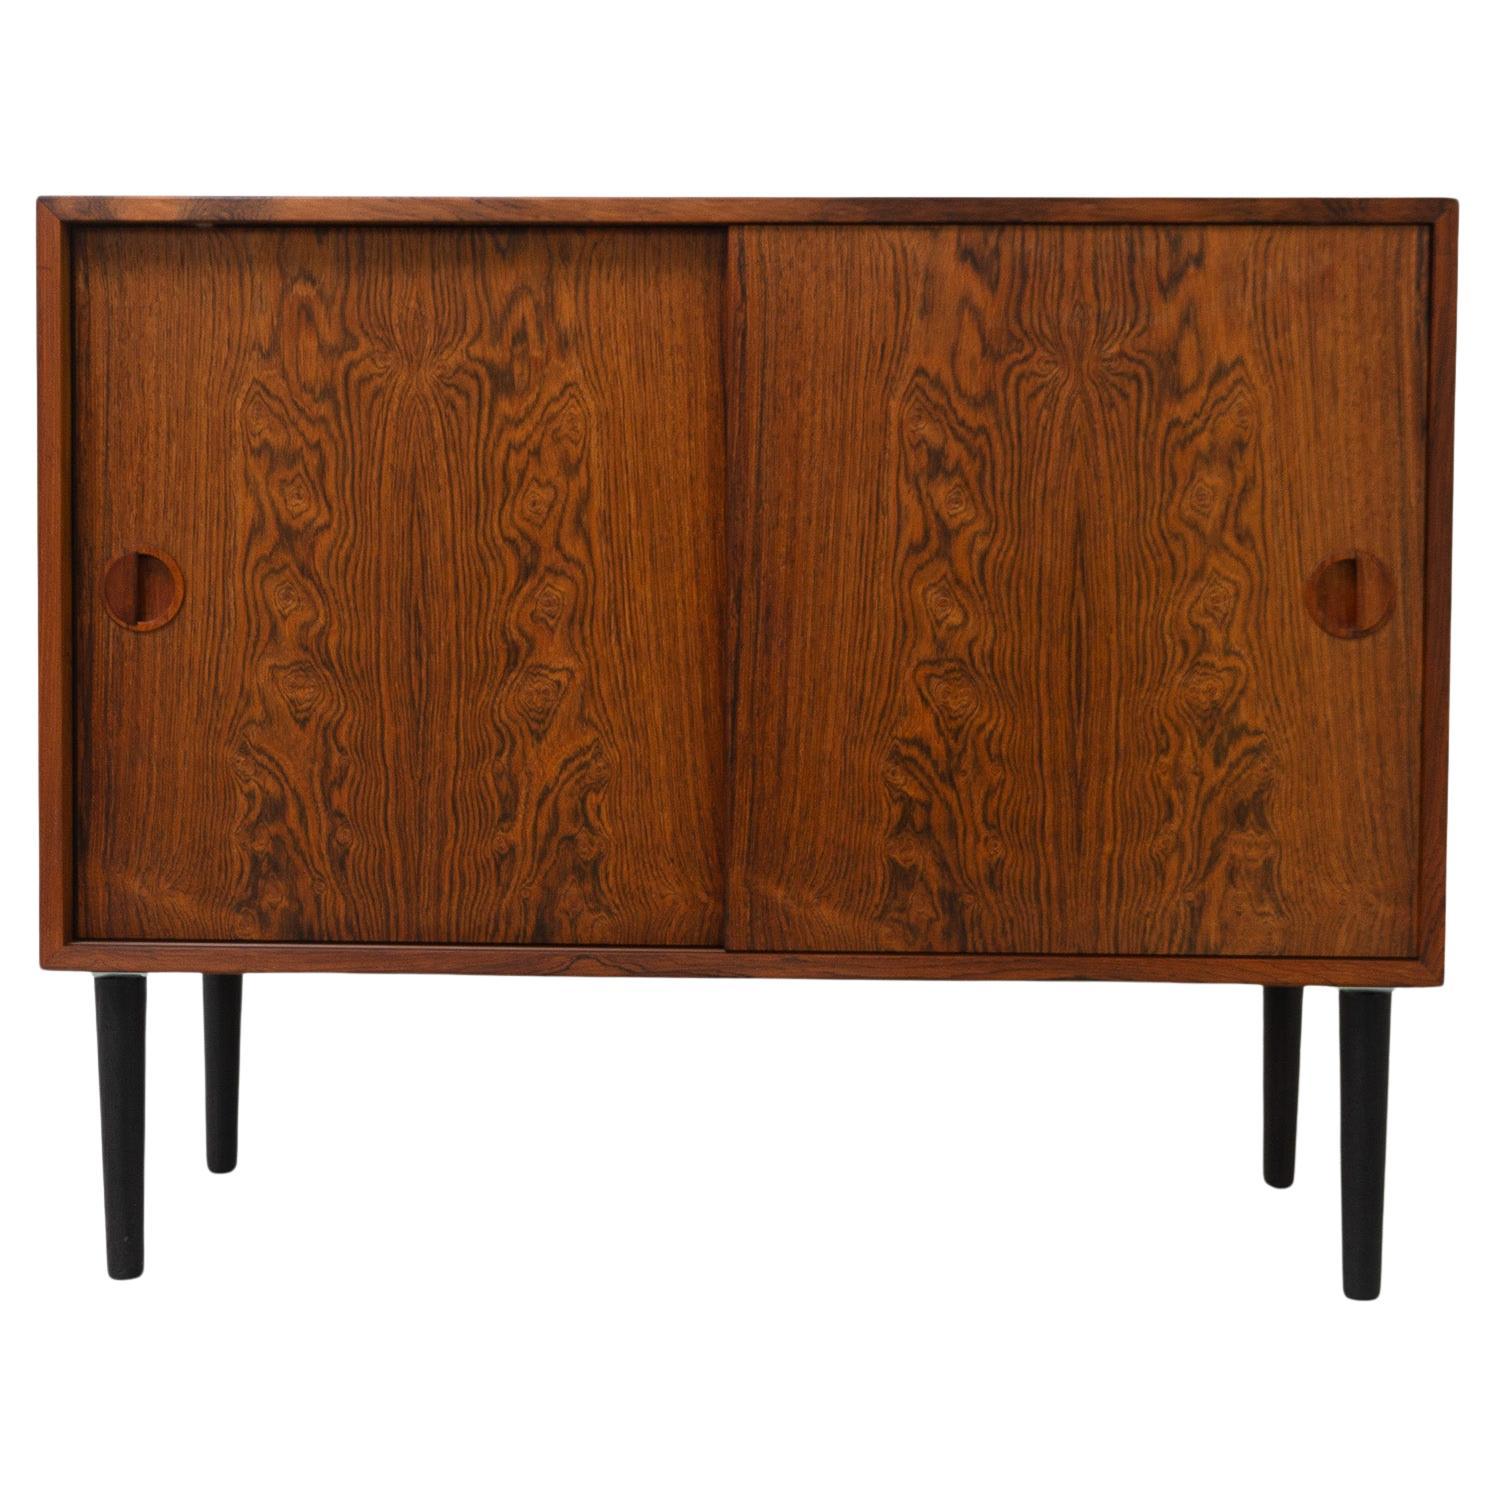 Vintage Danish Rosewood Sideboard with Sliding Doors by HG Furniture, 1960s